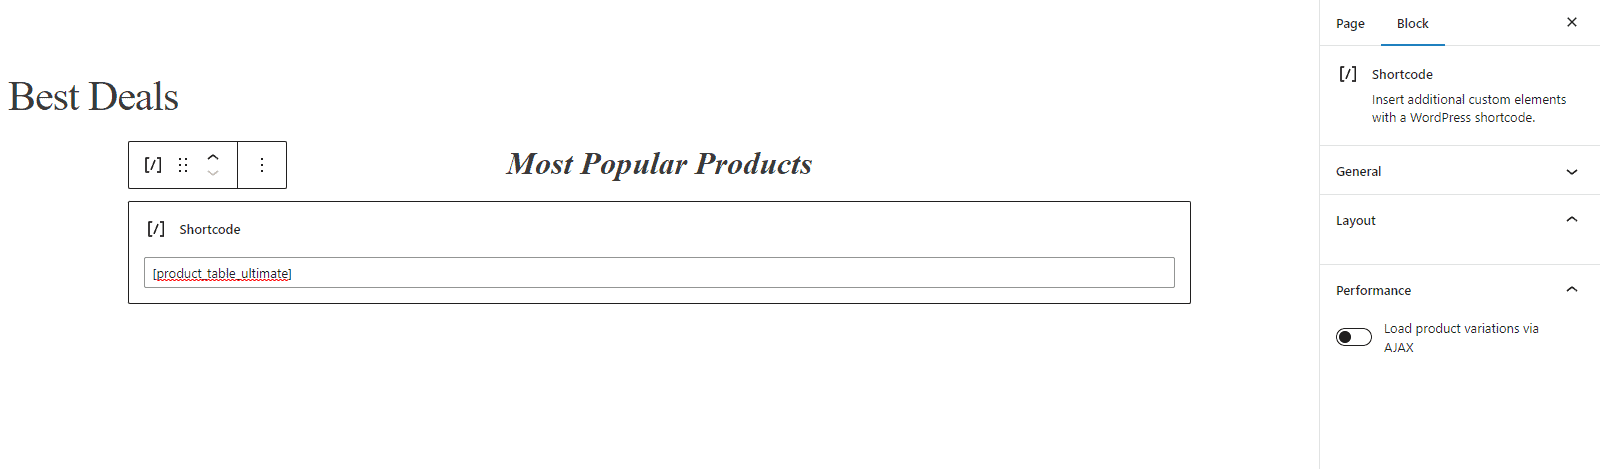 Product table shortcode